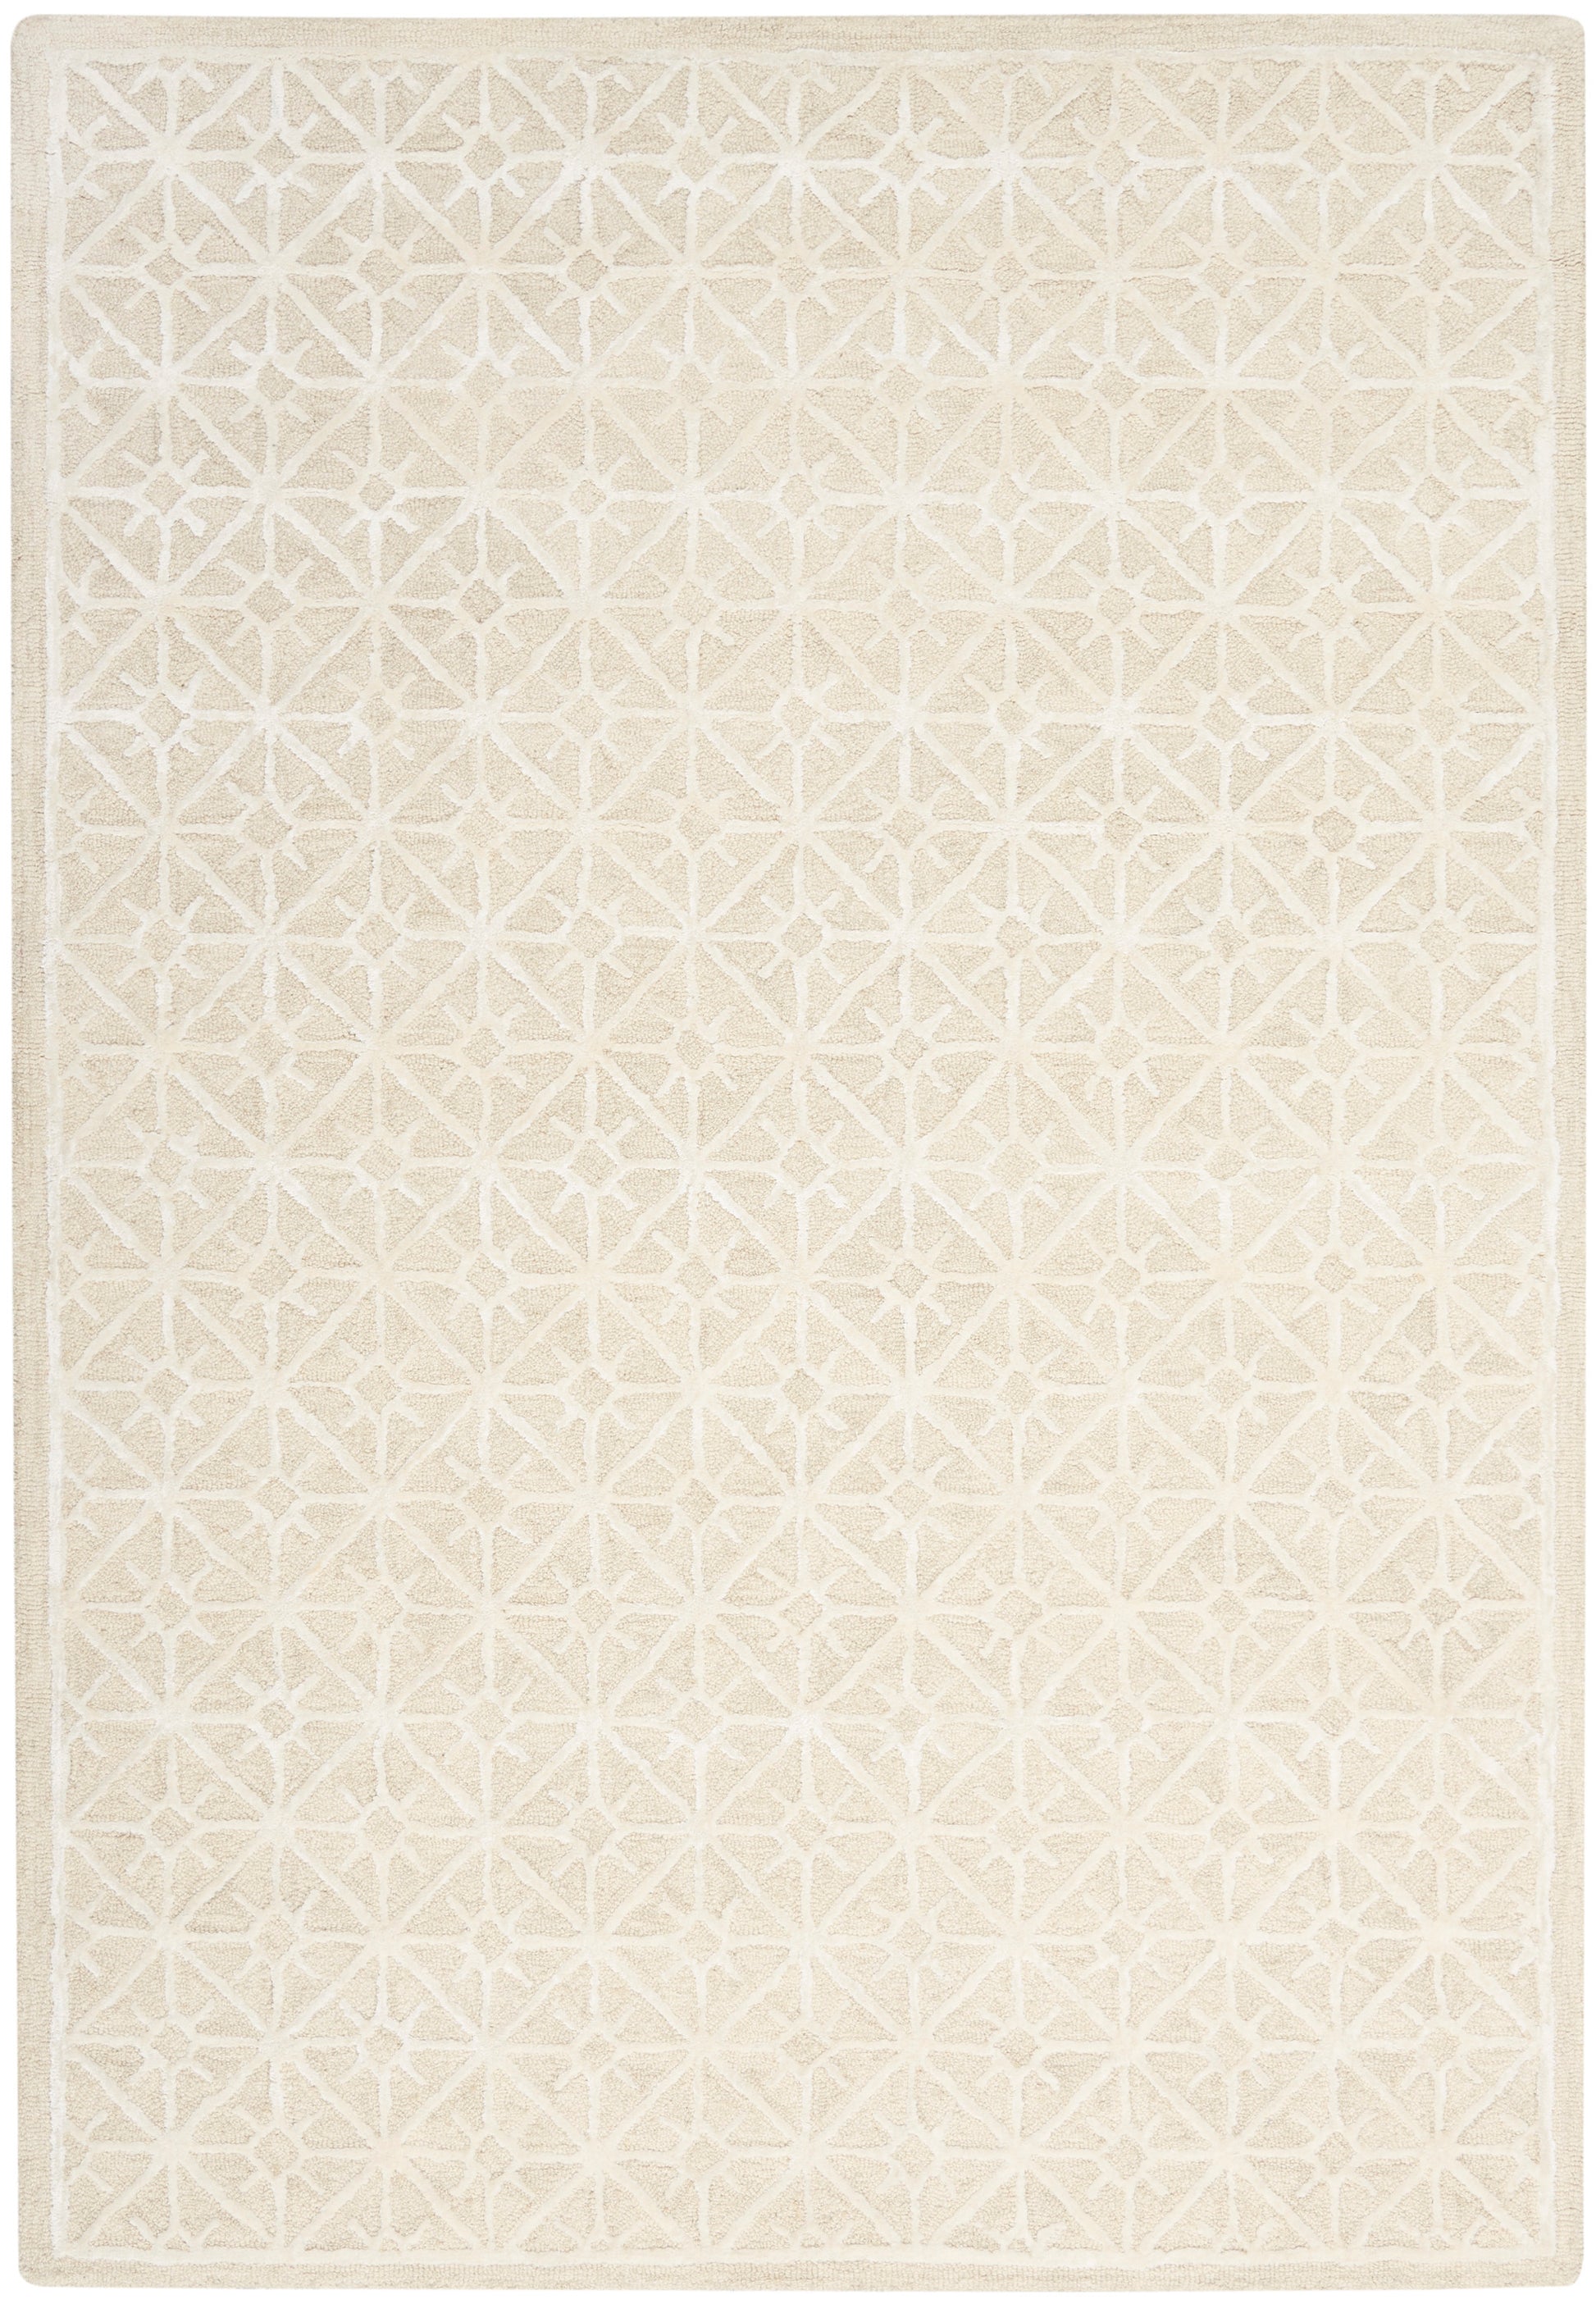 Nicole Curtis Series 2 SR201 Ivory Contemporary Tufted Rug